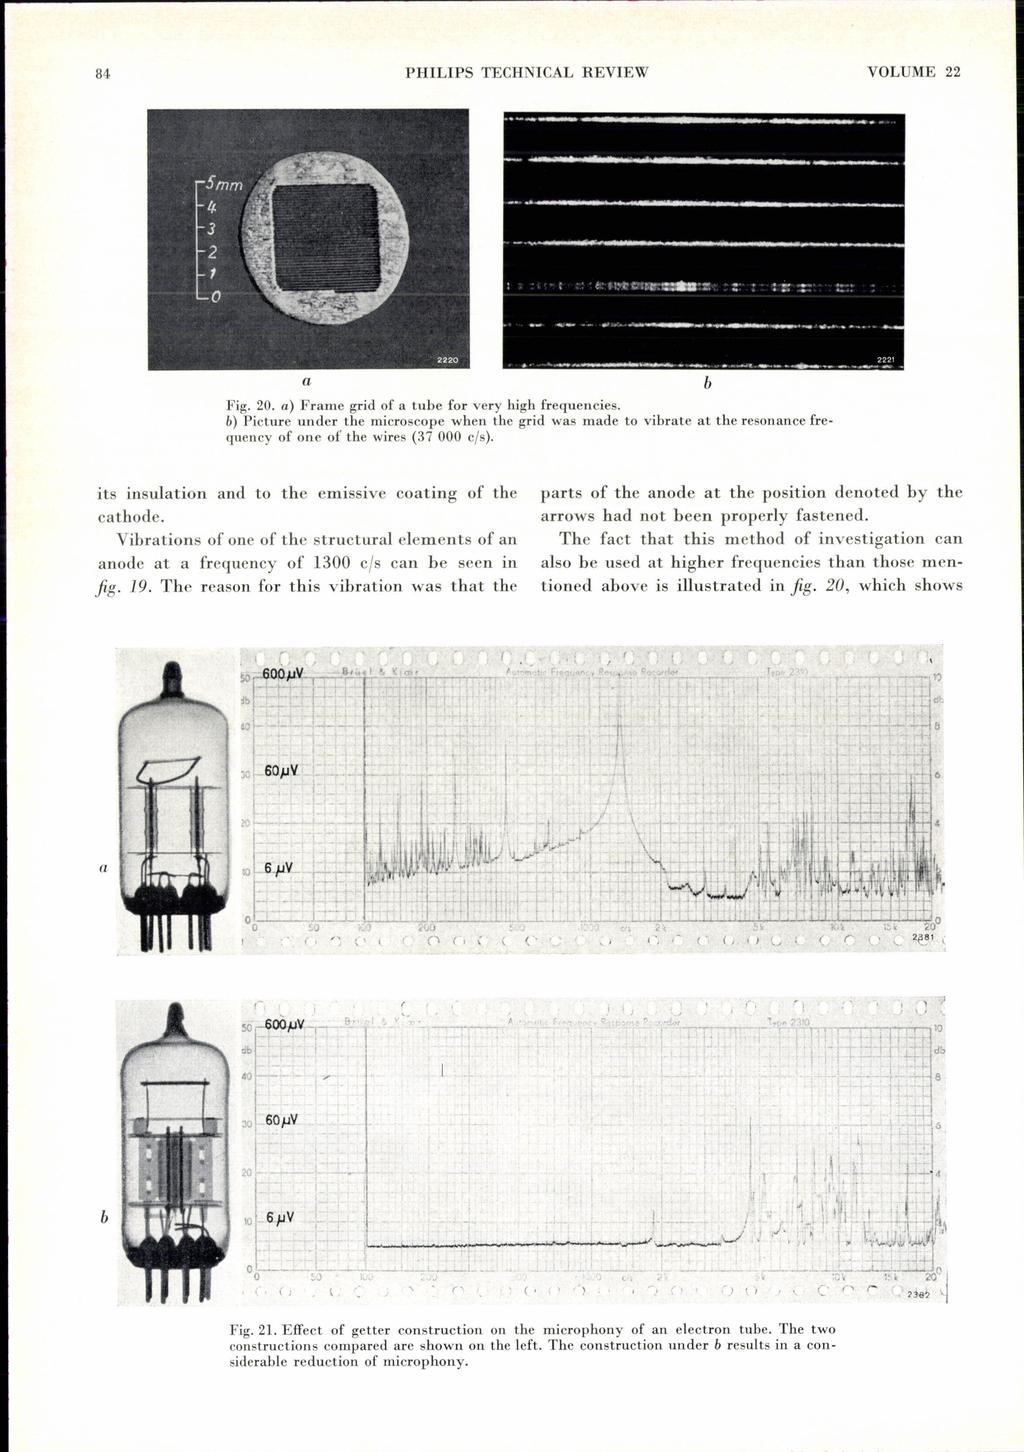 84 PHILIPS TECHNICAL REVIEW VOLUME 22 Fig. 20. ) Frme grid of tue for very high frequencies.